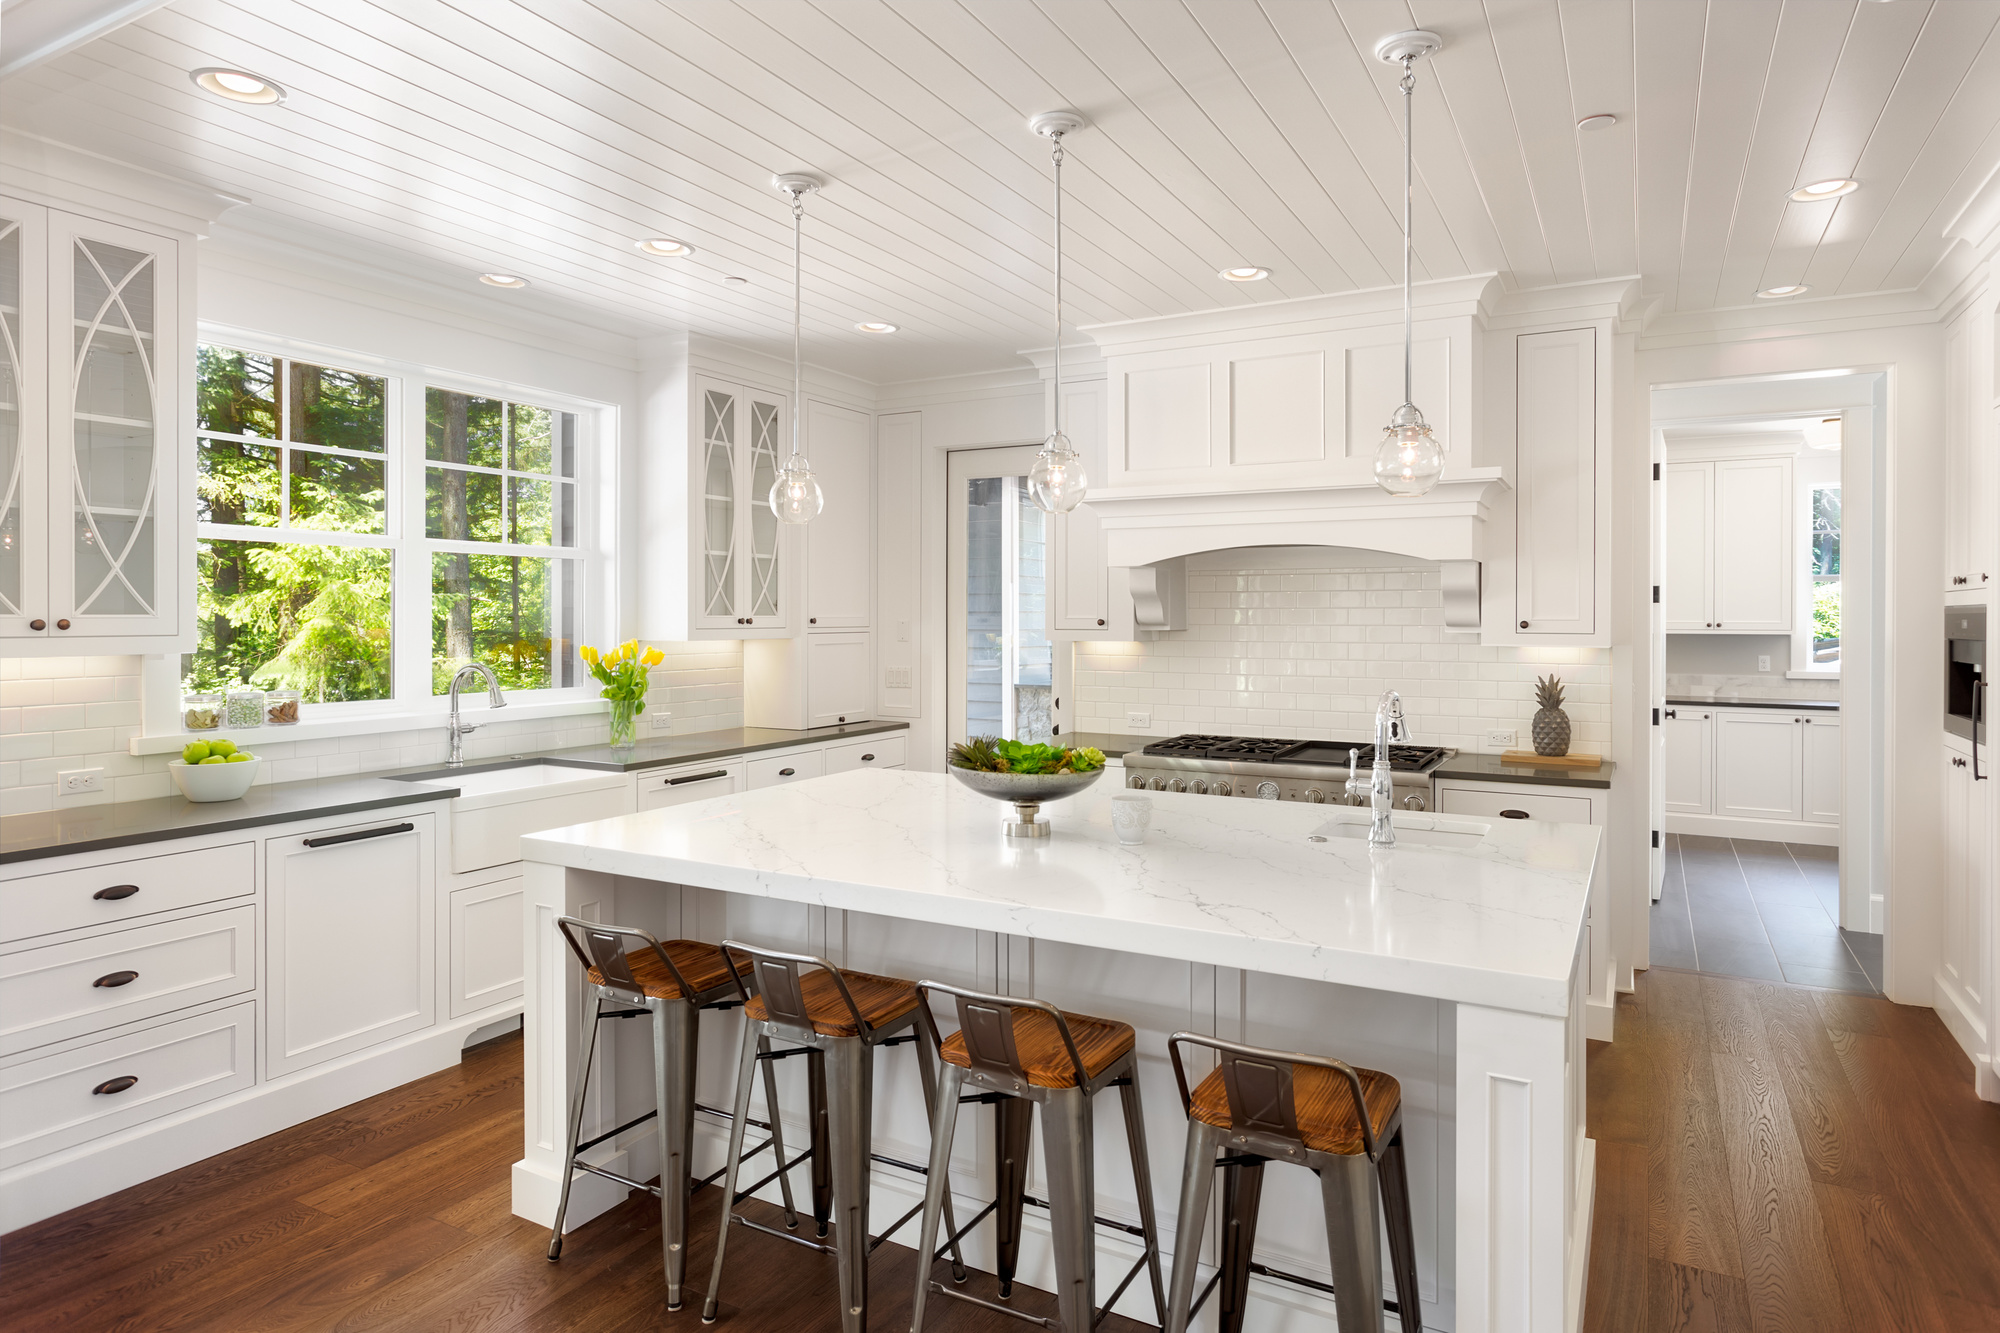 5 Tips for Staging Your Kitchen for Resell